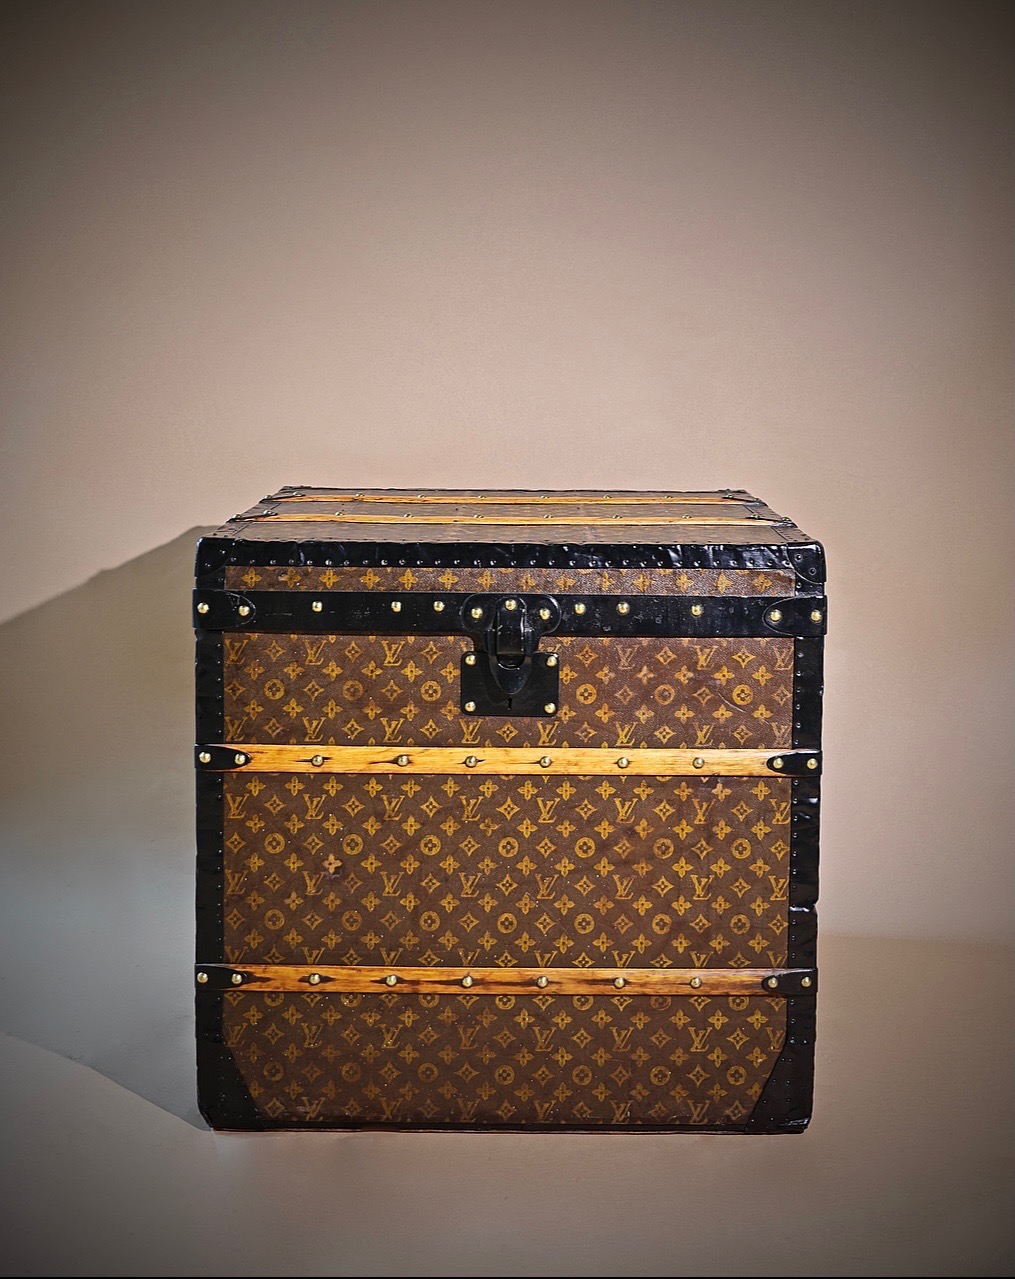 the-well-traveled-trunk-louis-vuitton-thumbnail-product-5742-1